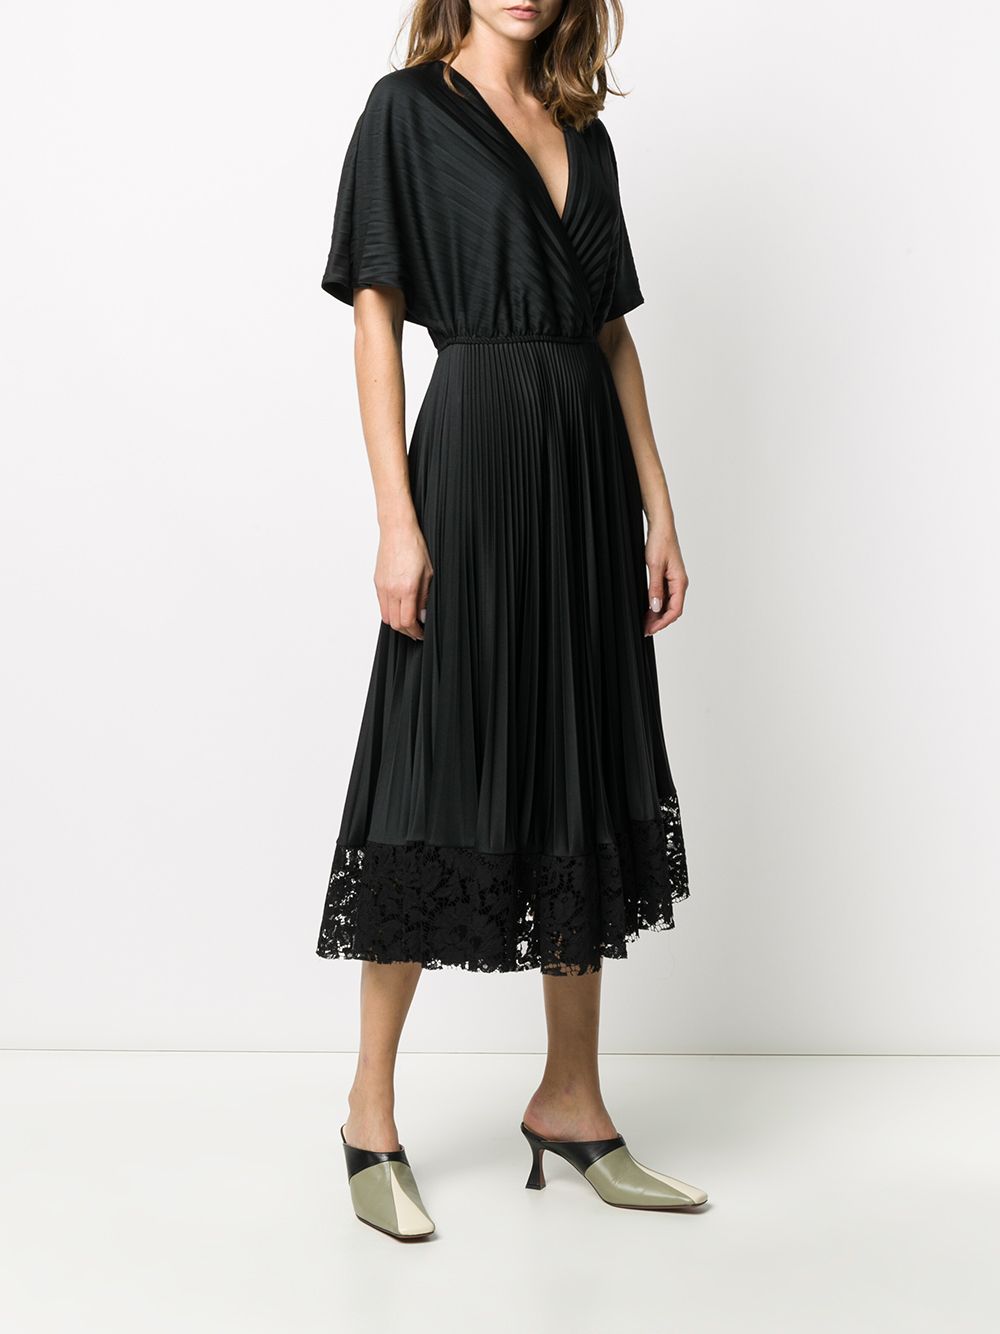 Shop Valentino pleated wrap dress with Express Delivery - FARFETCH